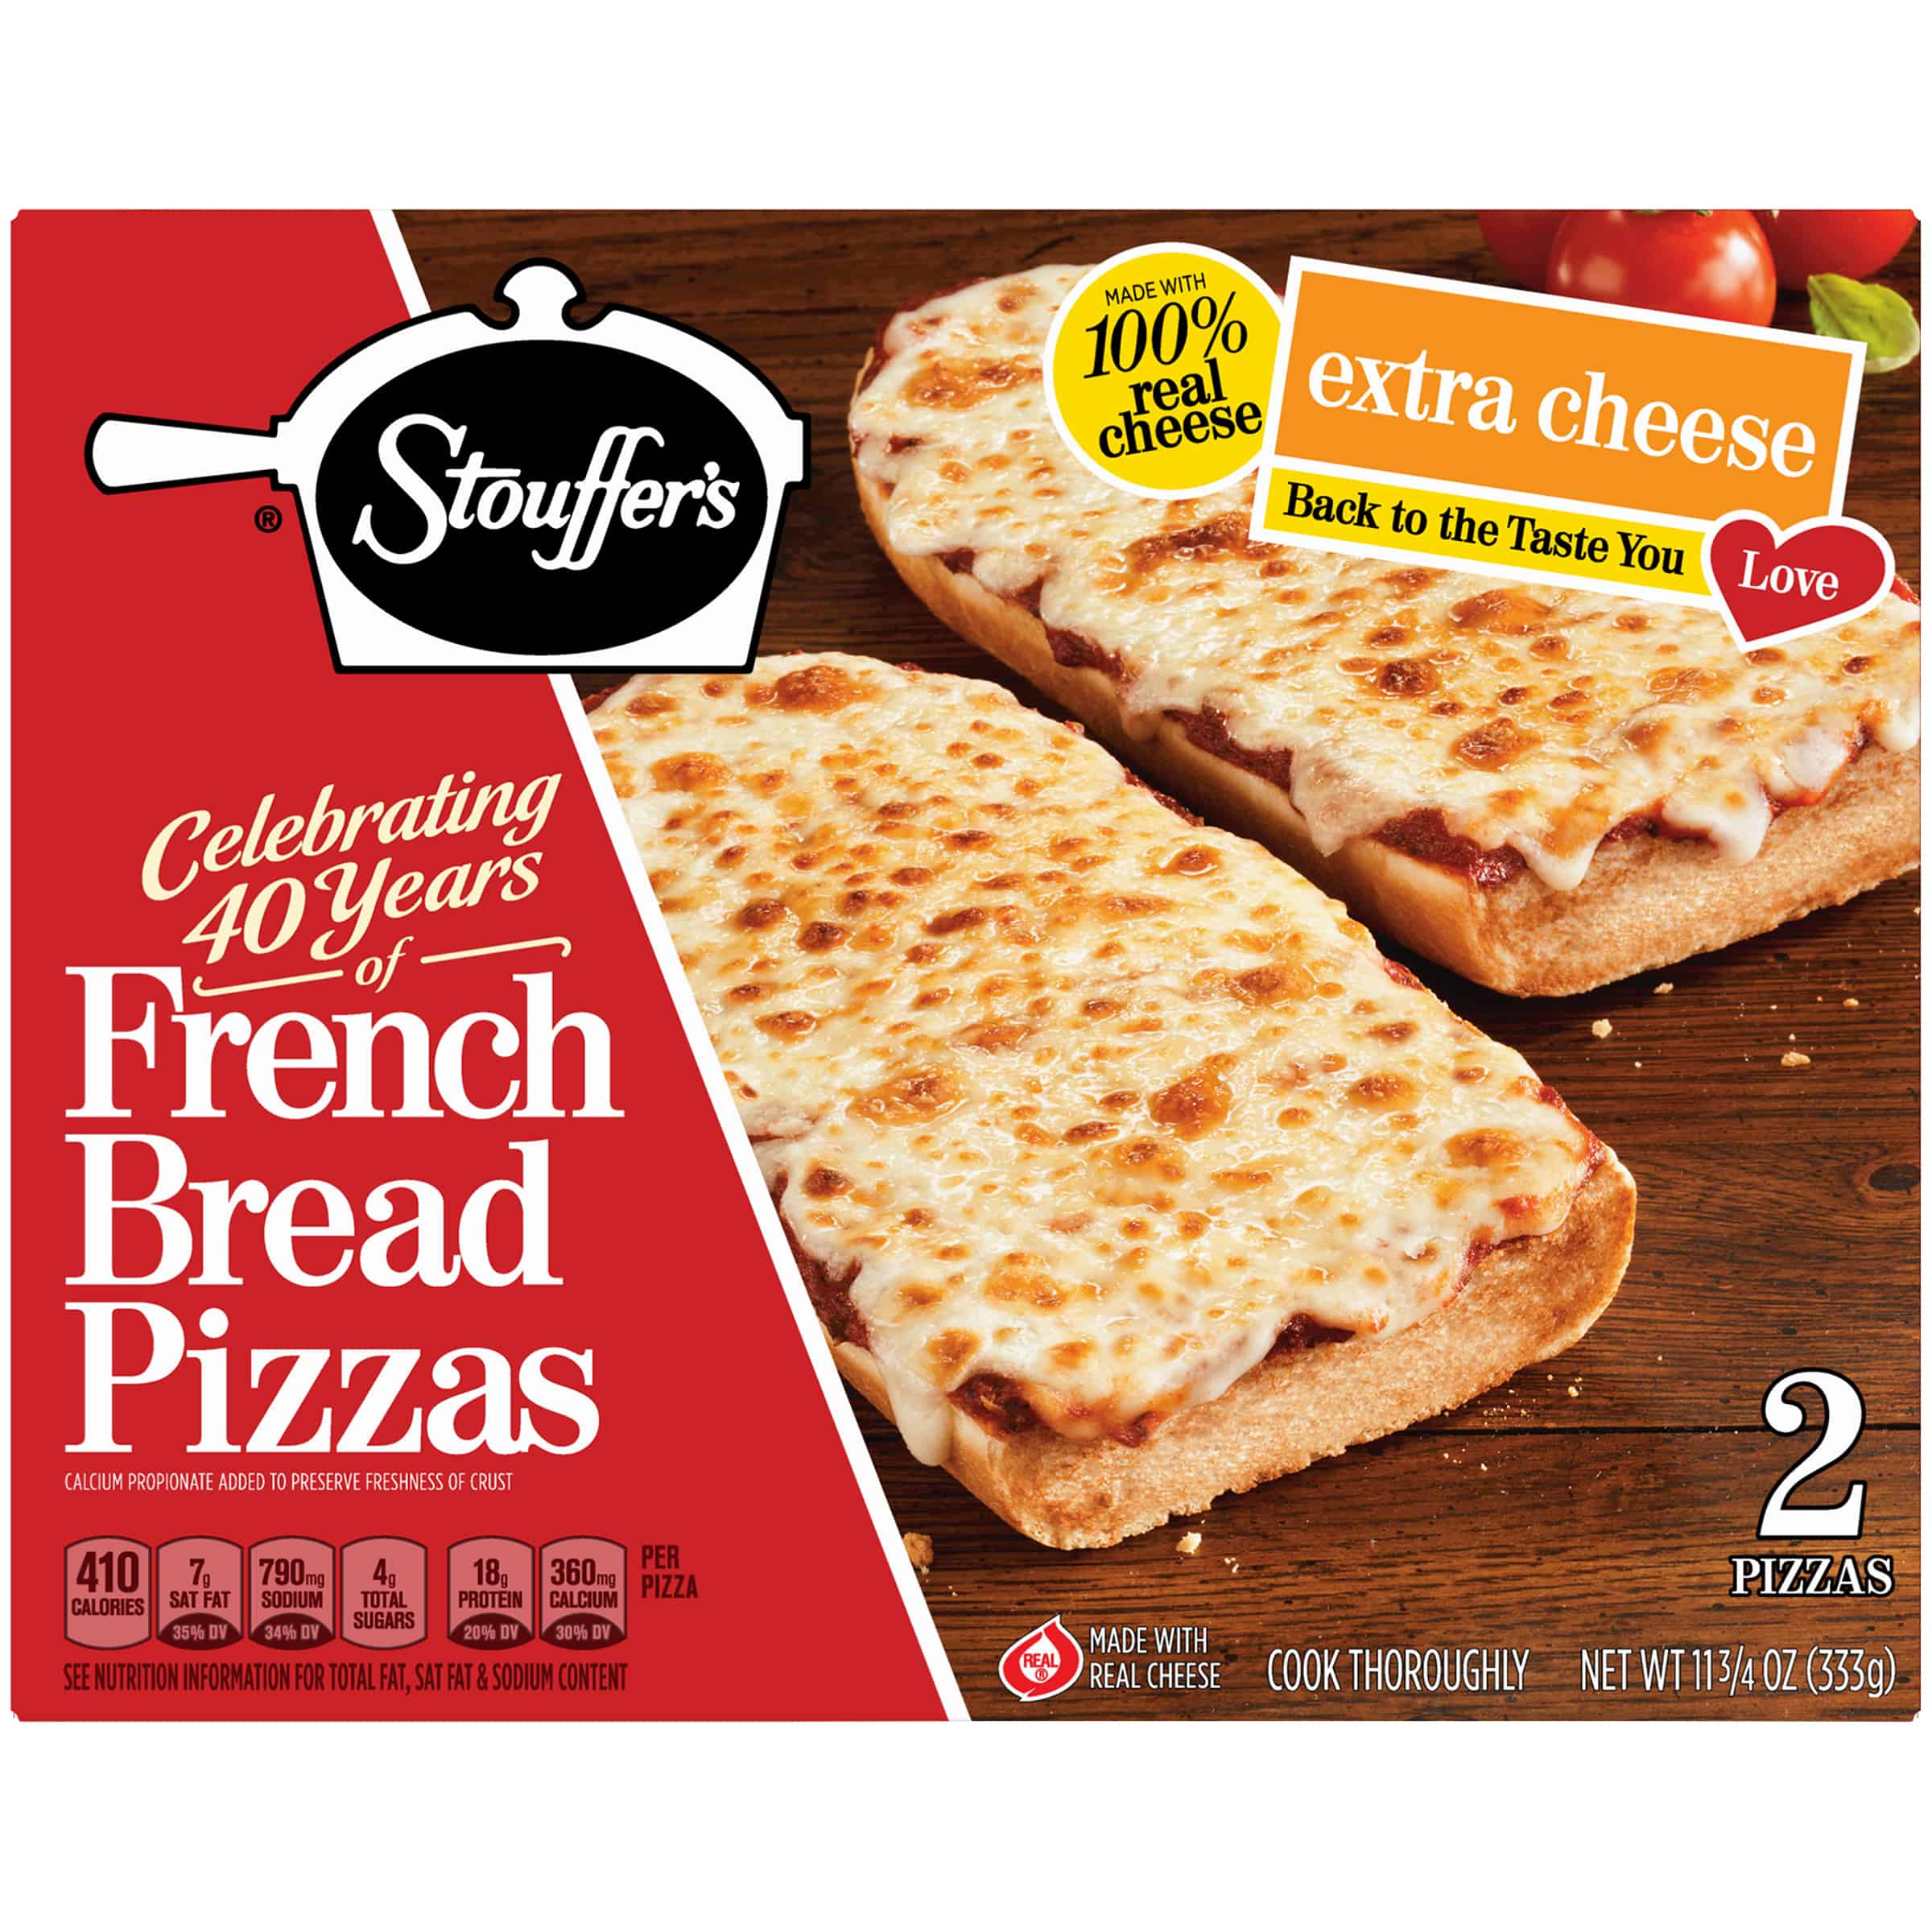 Stouffer's French bread pizzas 2 pizzas